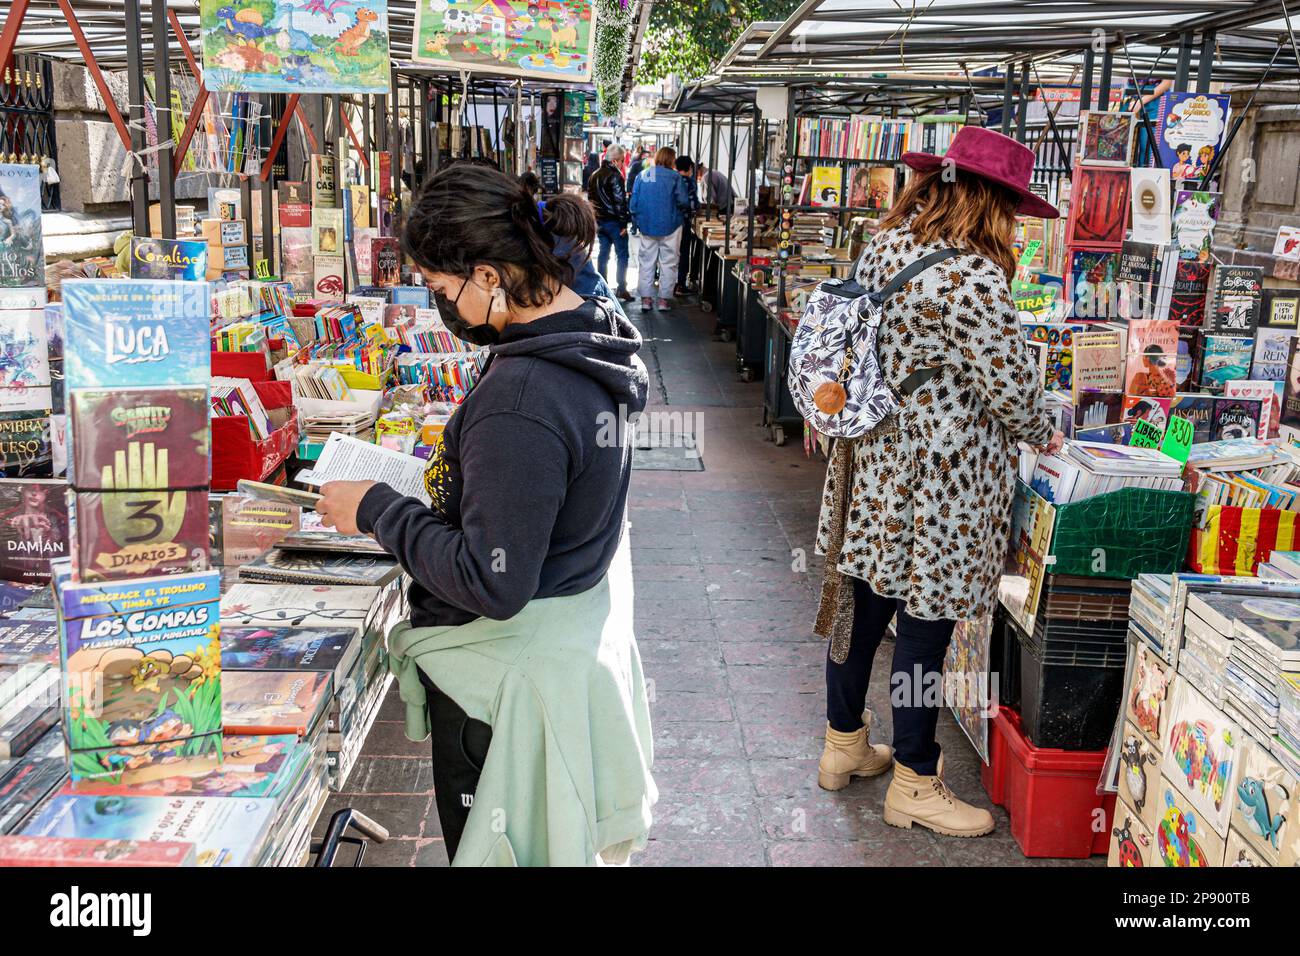 Mexico City,Callejon Condesa Los Rescatadores,books bookseller booksellers kiosks,browsing reading looking at,woman women lady female,adult adults,res Stock Photo